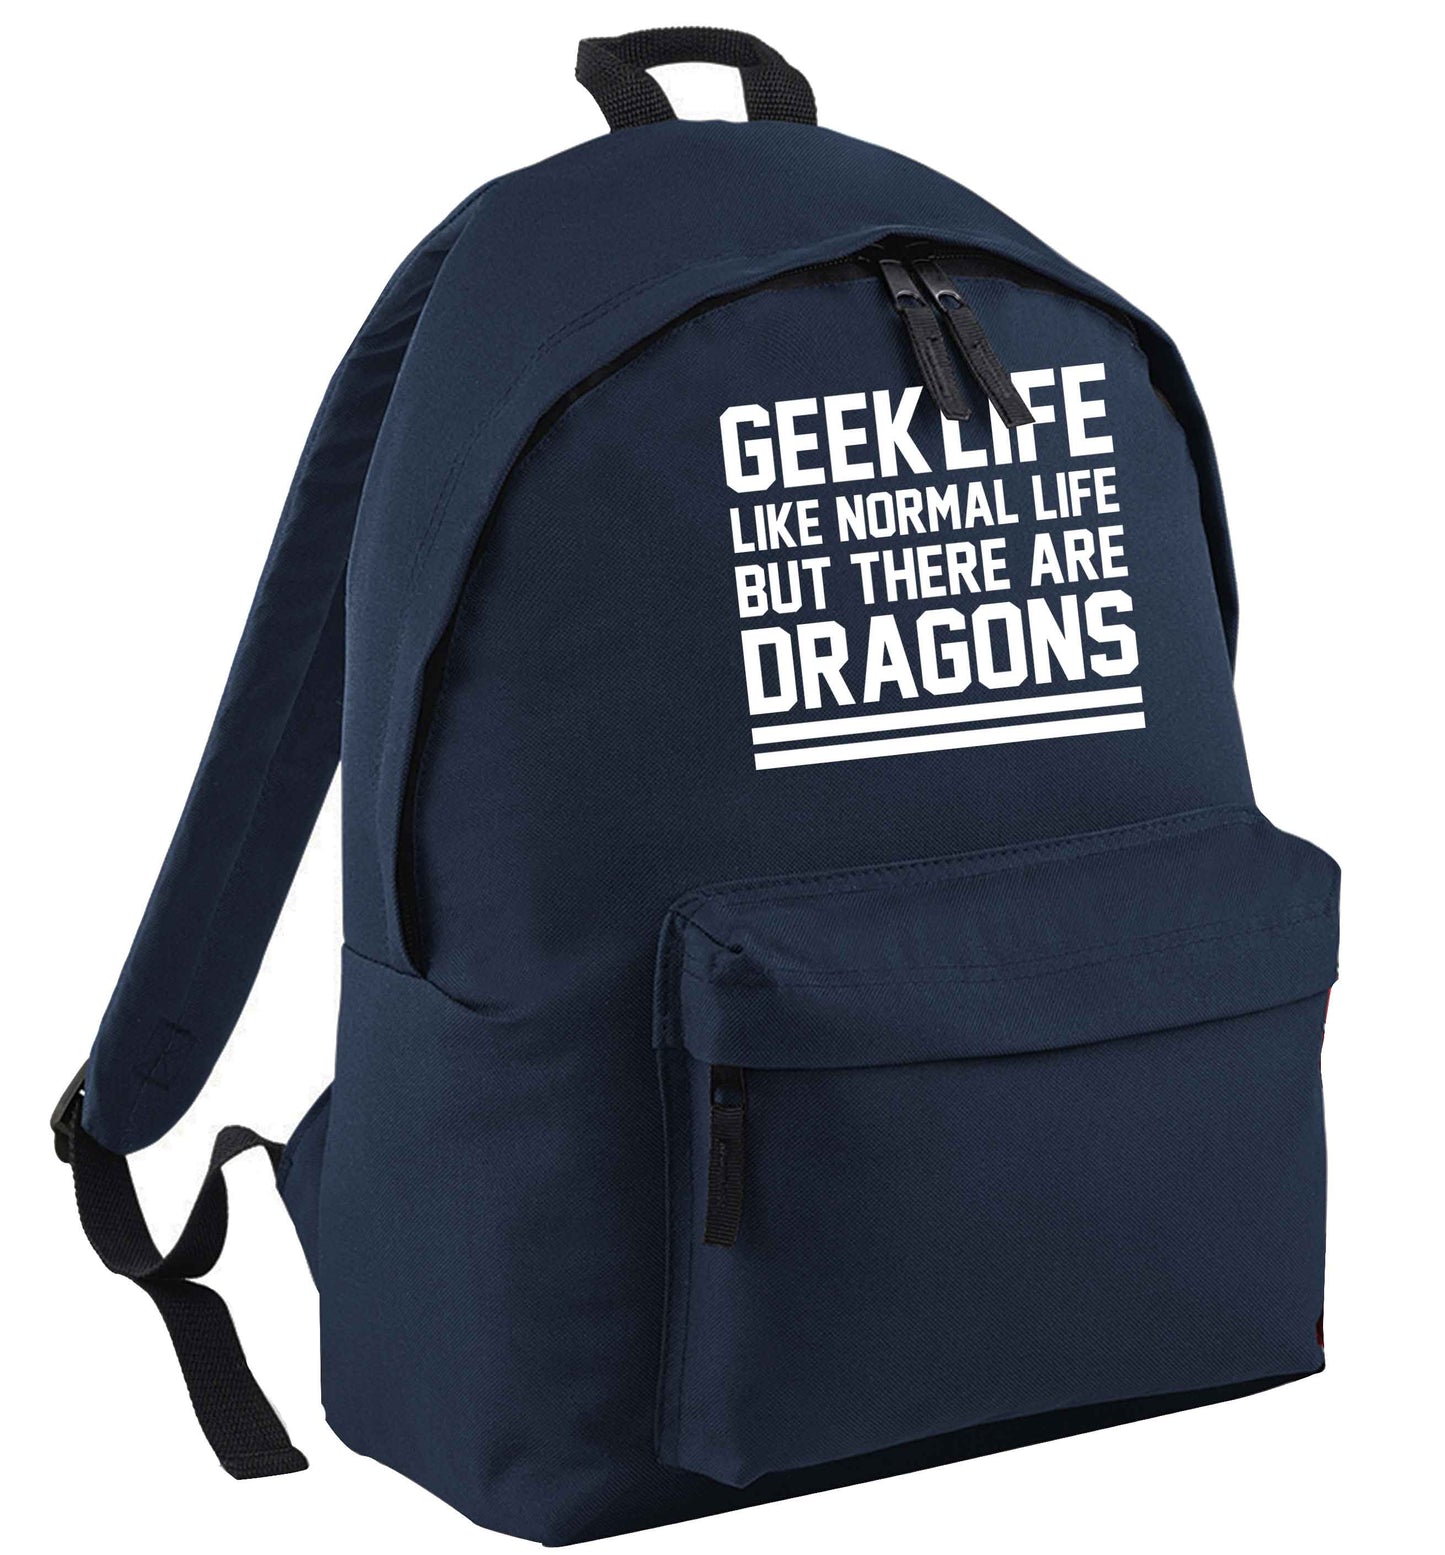 Geek life like normal life but there are dragons navy adults backpack